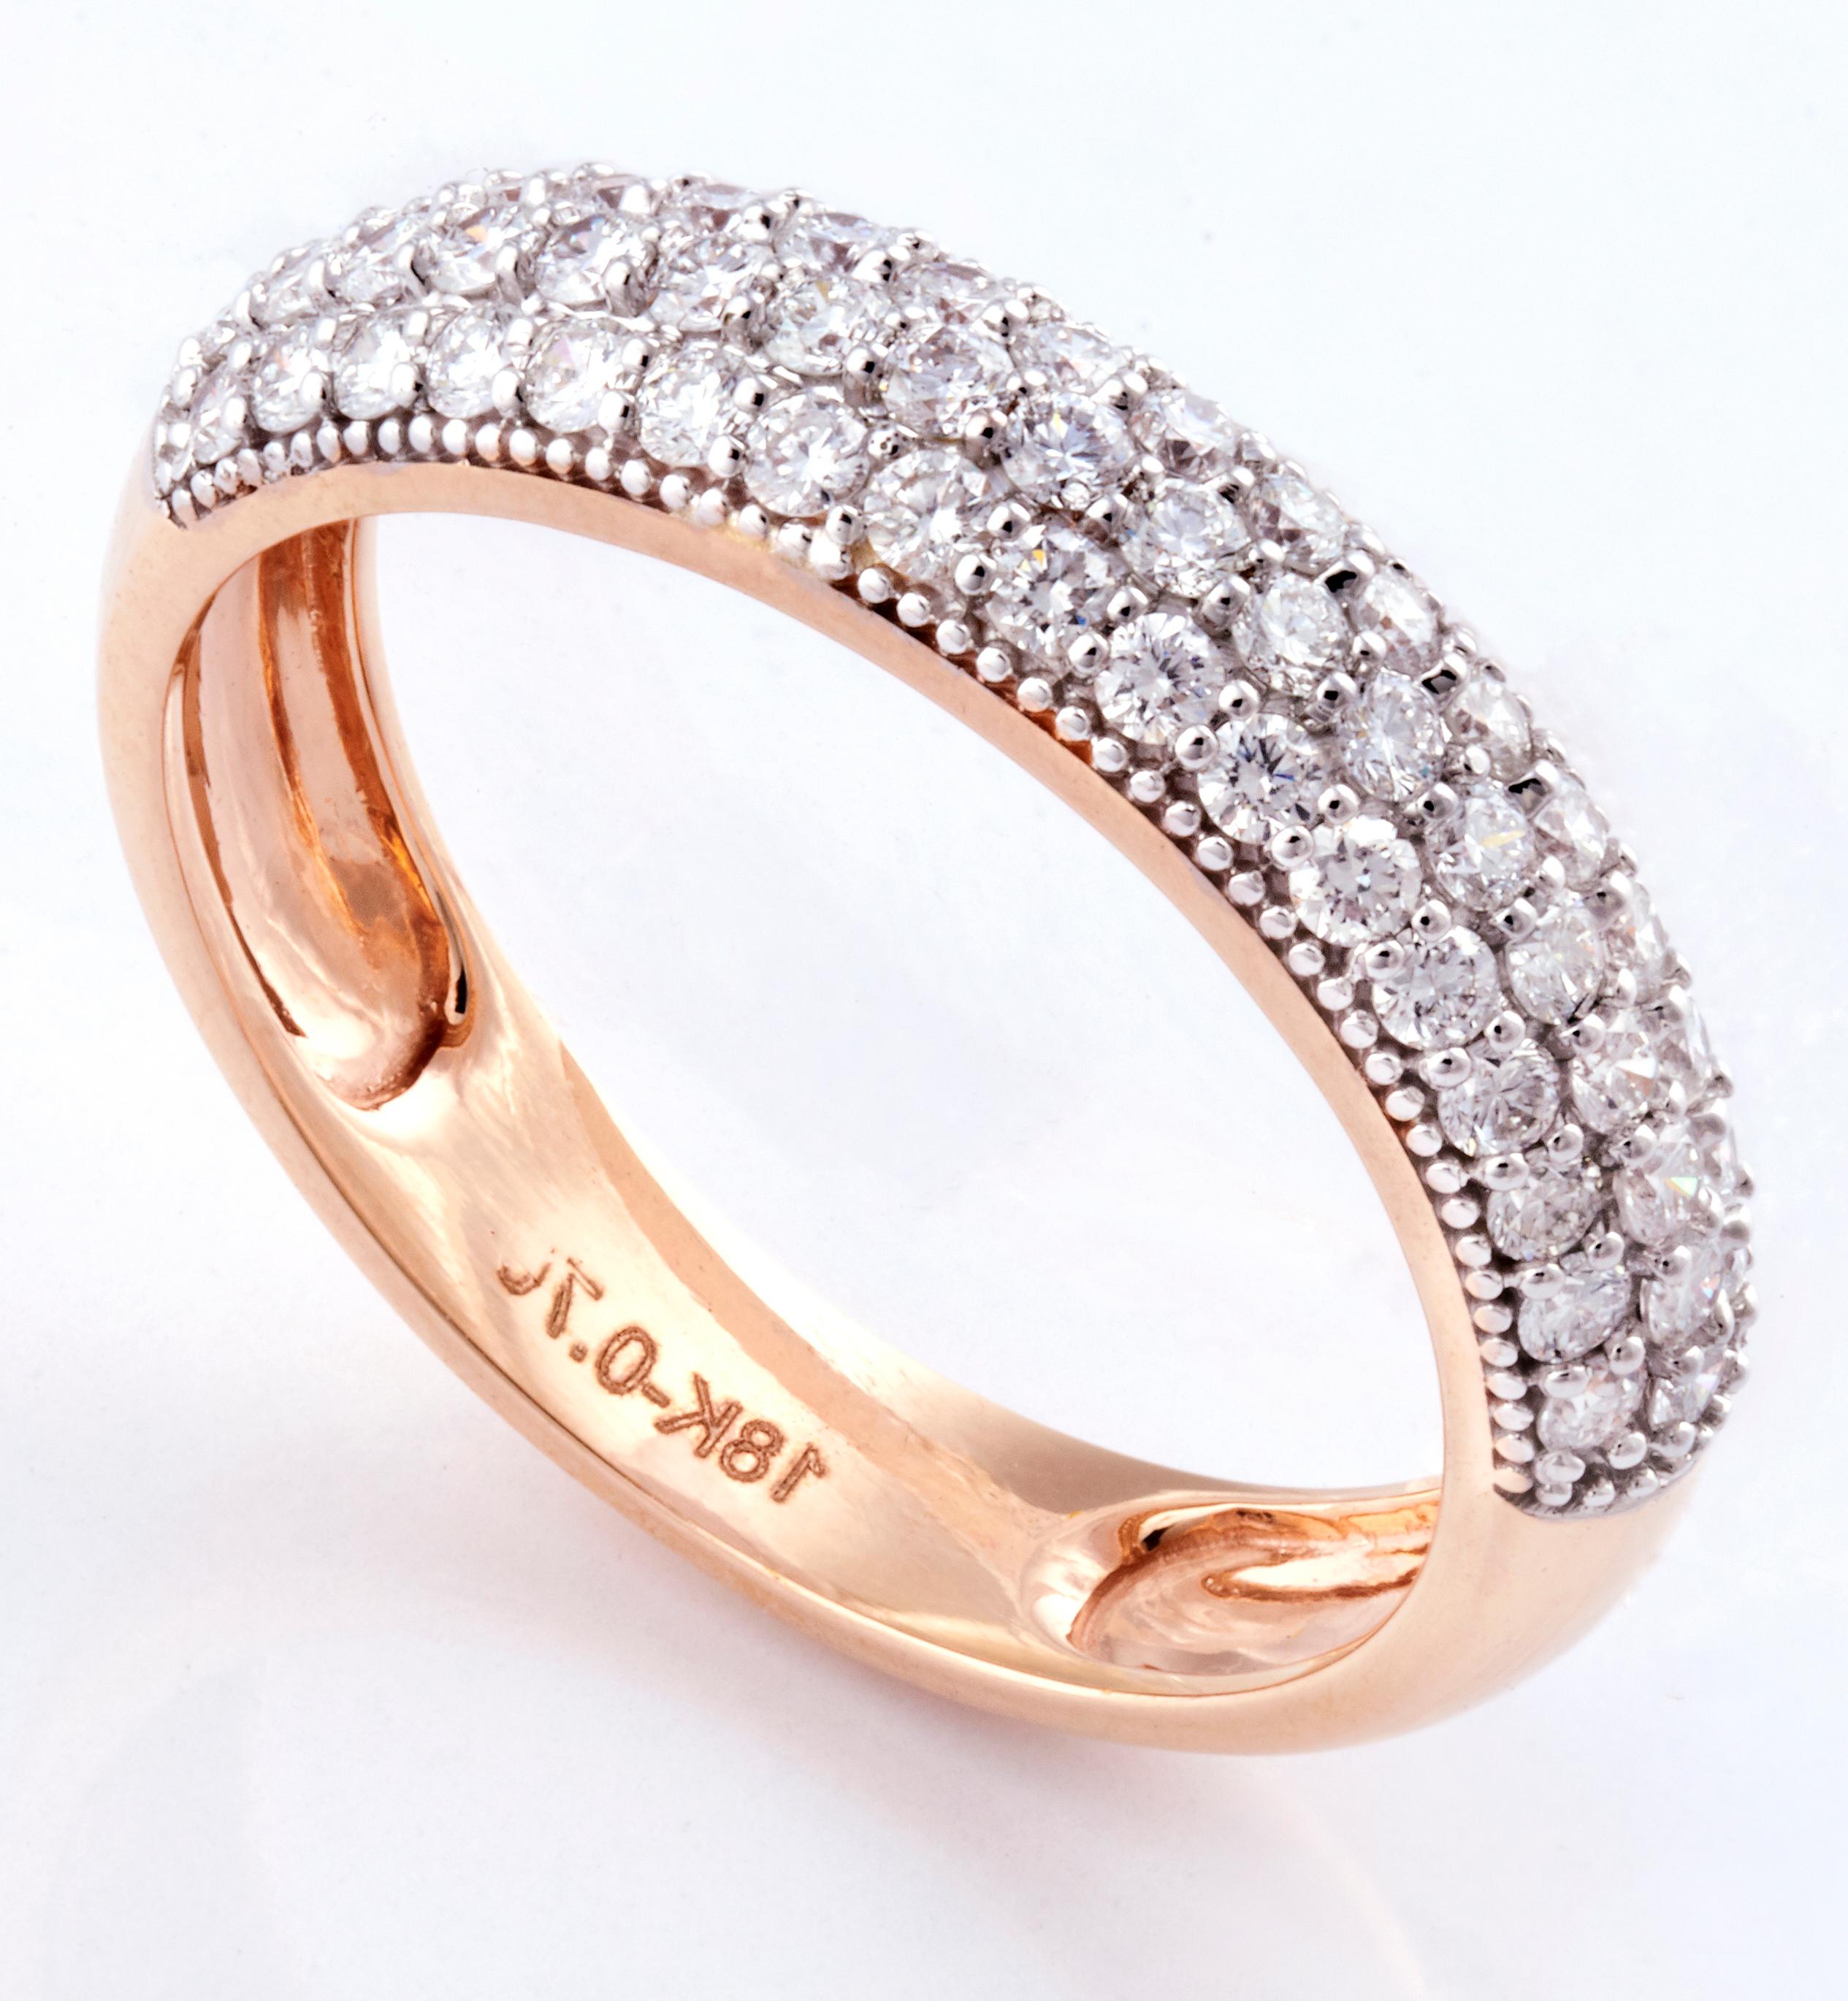 A Classic micro-pavé Diamond band set in 3.99 grams of 18k Rose Gold with 52 round cut diamonds studded around in VS/G quality and colour weighing 0.70 carats. 

These diamonds have been carefully picked and selected from authentic sources and